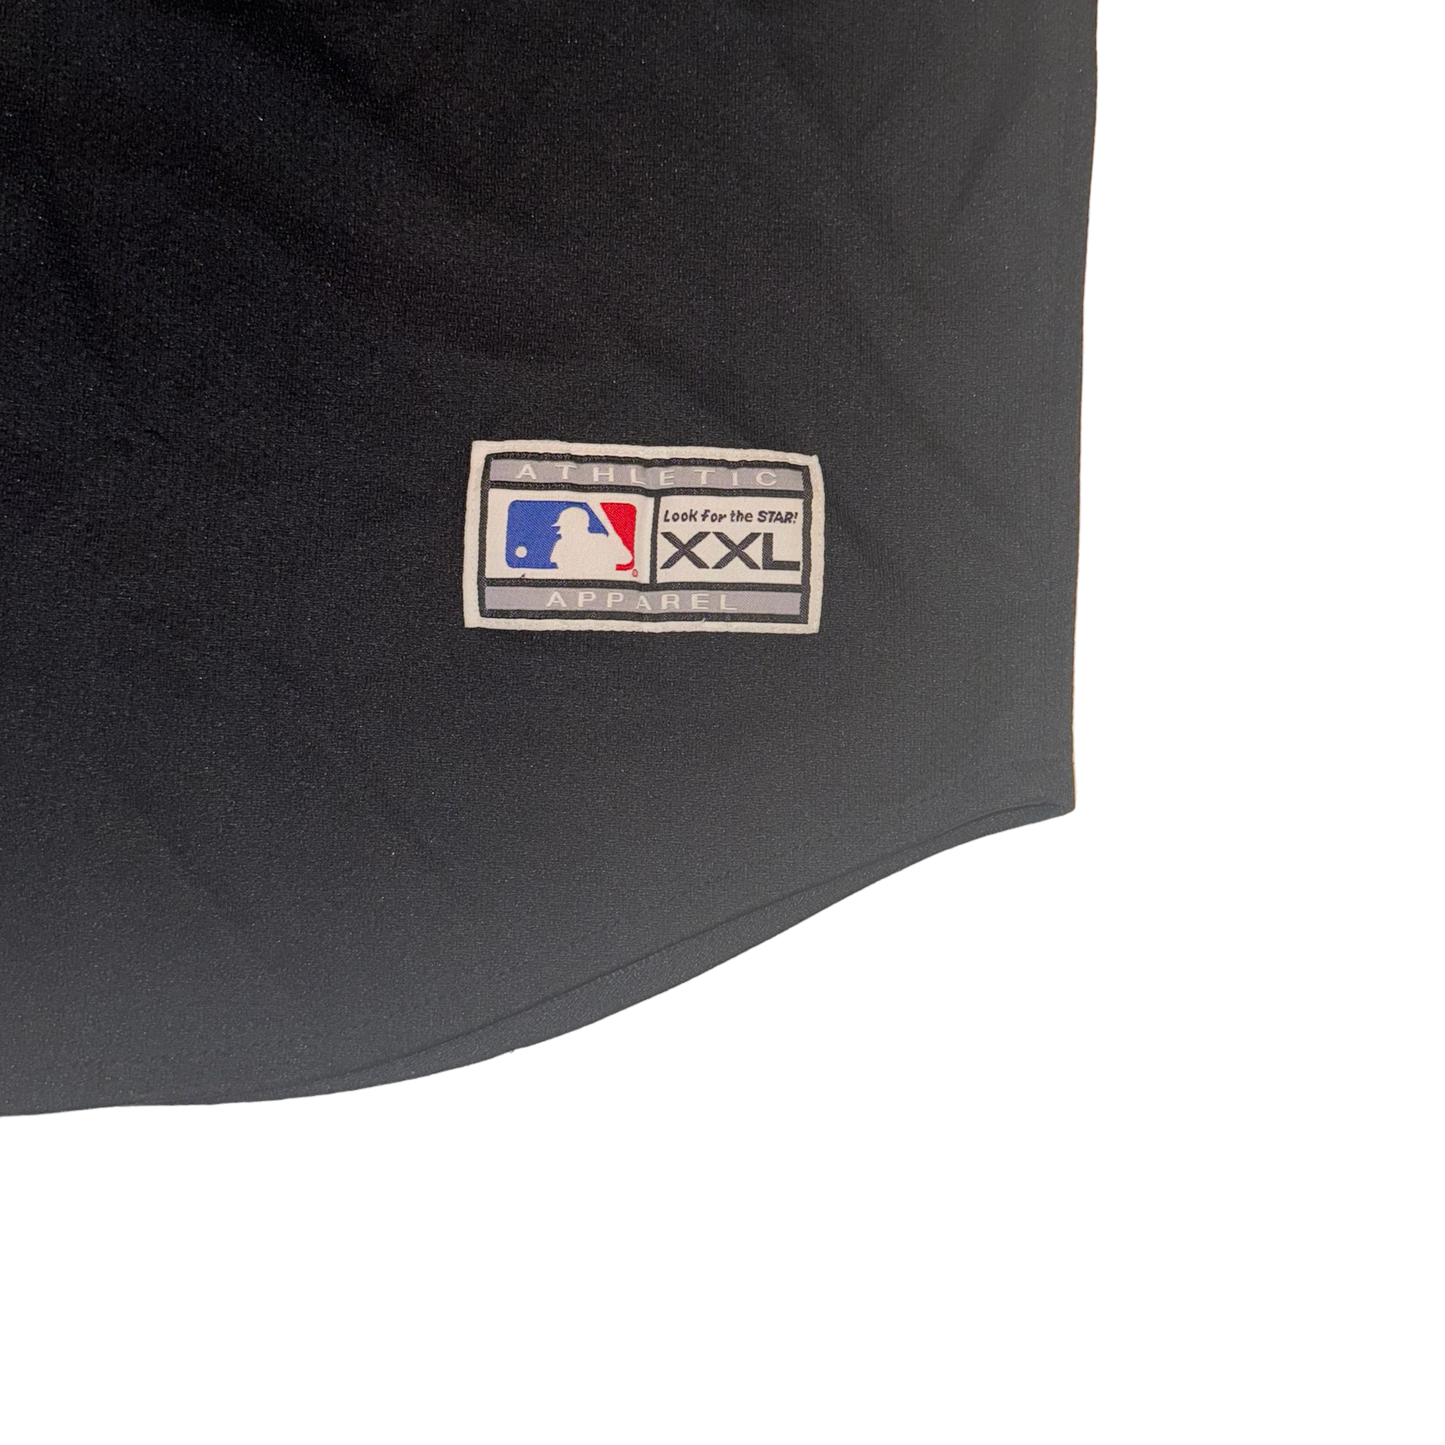 Starter - Chicaco White Sox Black Vintage Y2K Patched Jersey